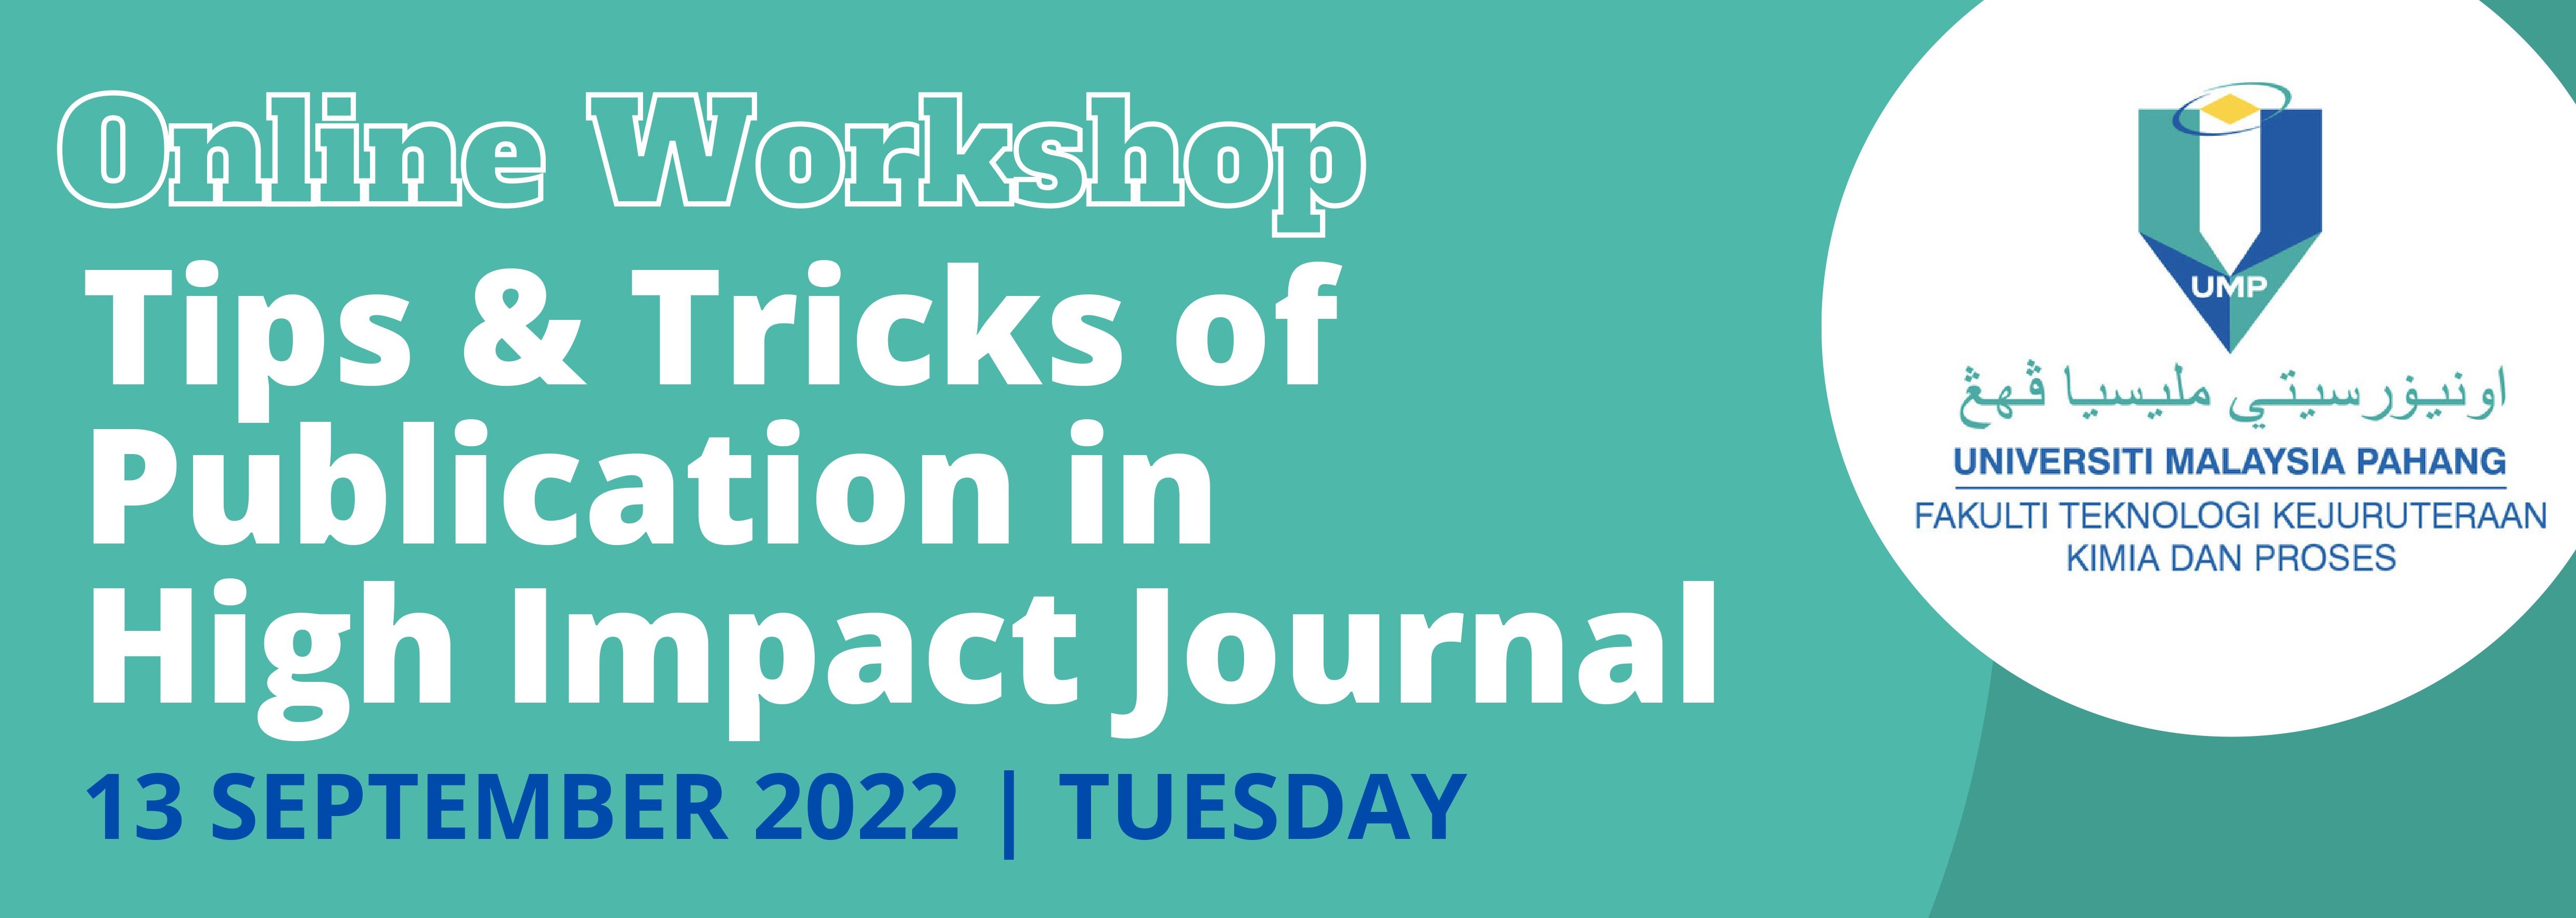 ONLINE WORKSHOP ON THE TIPS & TRICKS OF PUBLICATION IN HIGH IMPACT JOURNAL